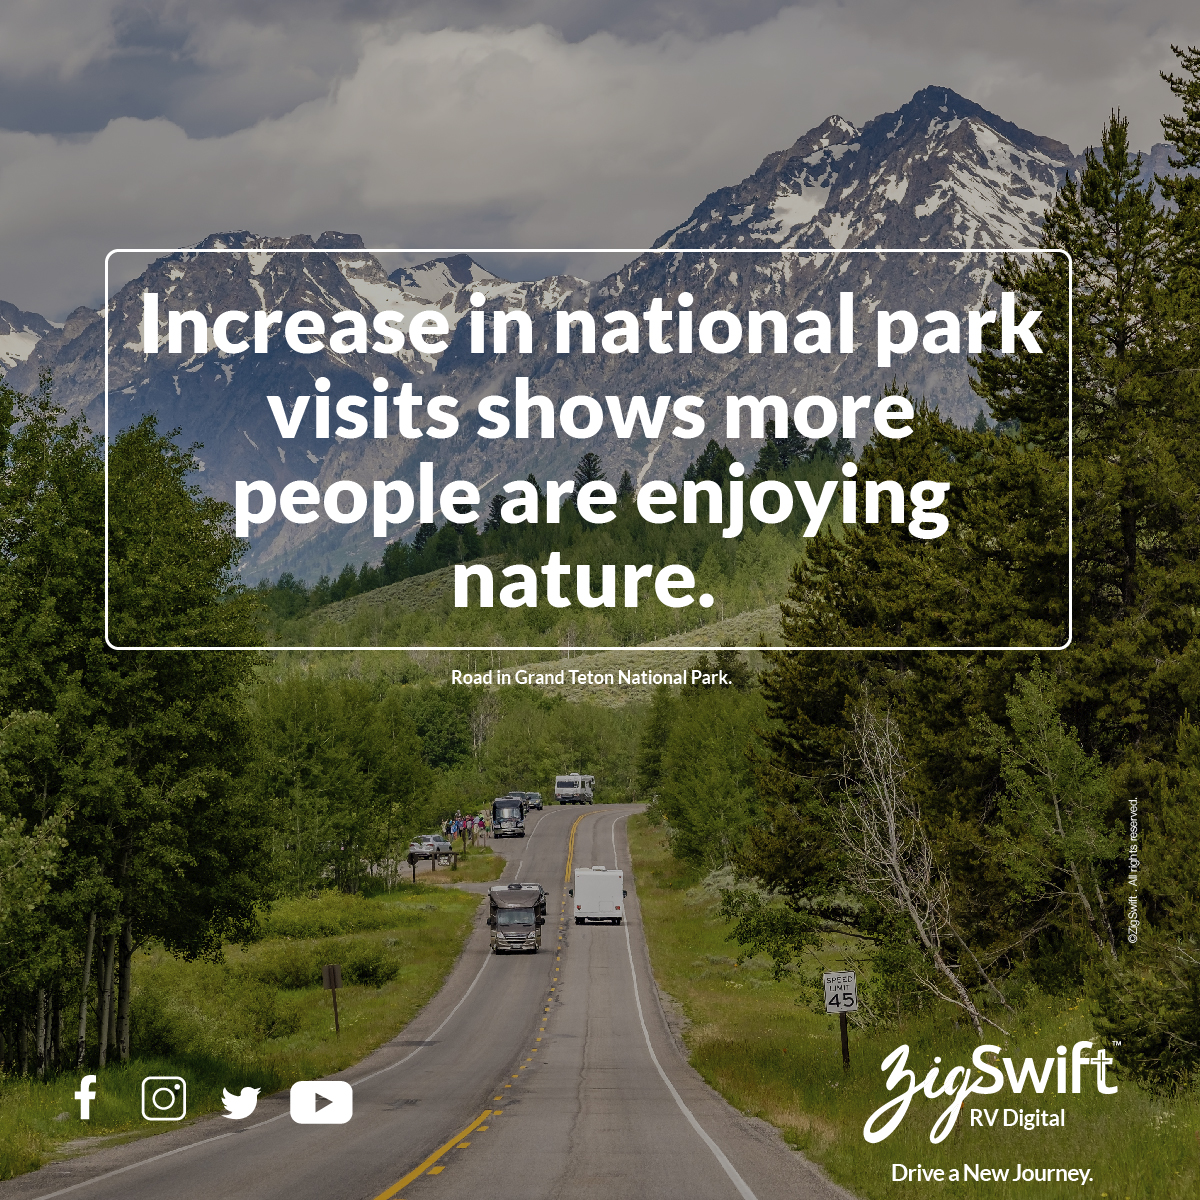 Increase in national park visits shows more people are enjoying nature. 
Grab your RV and explore the wild. 🌄

Don't miss out!

#RVindustry #BuyNow